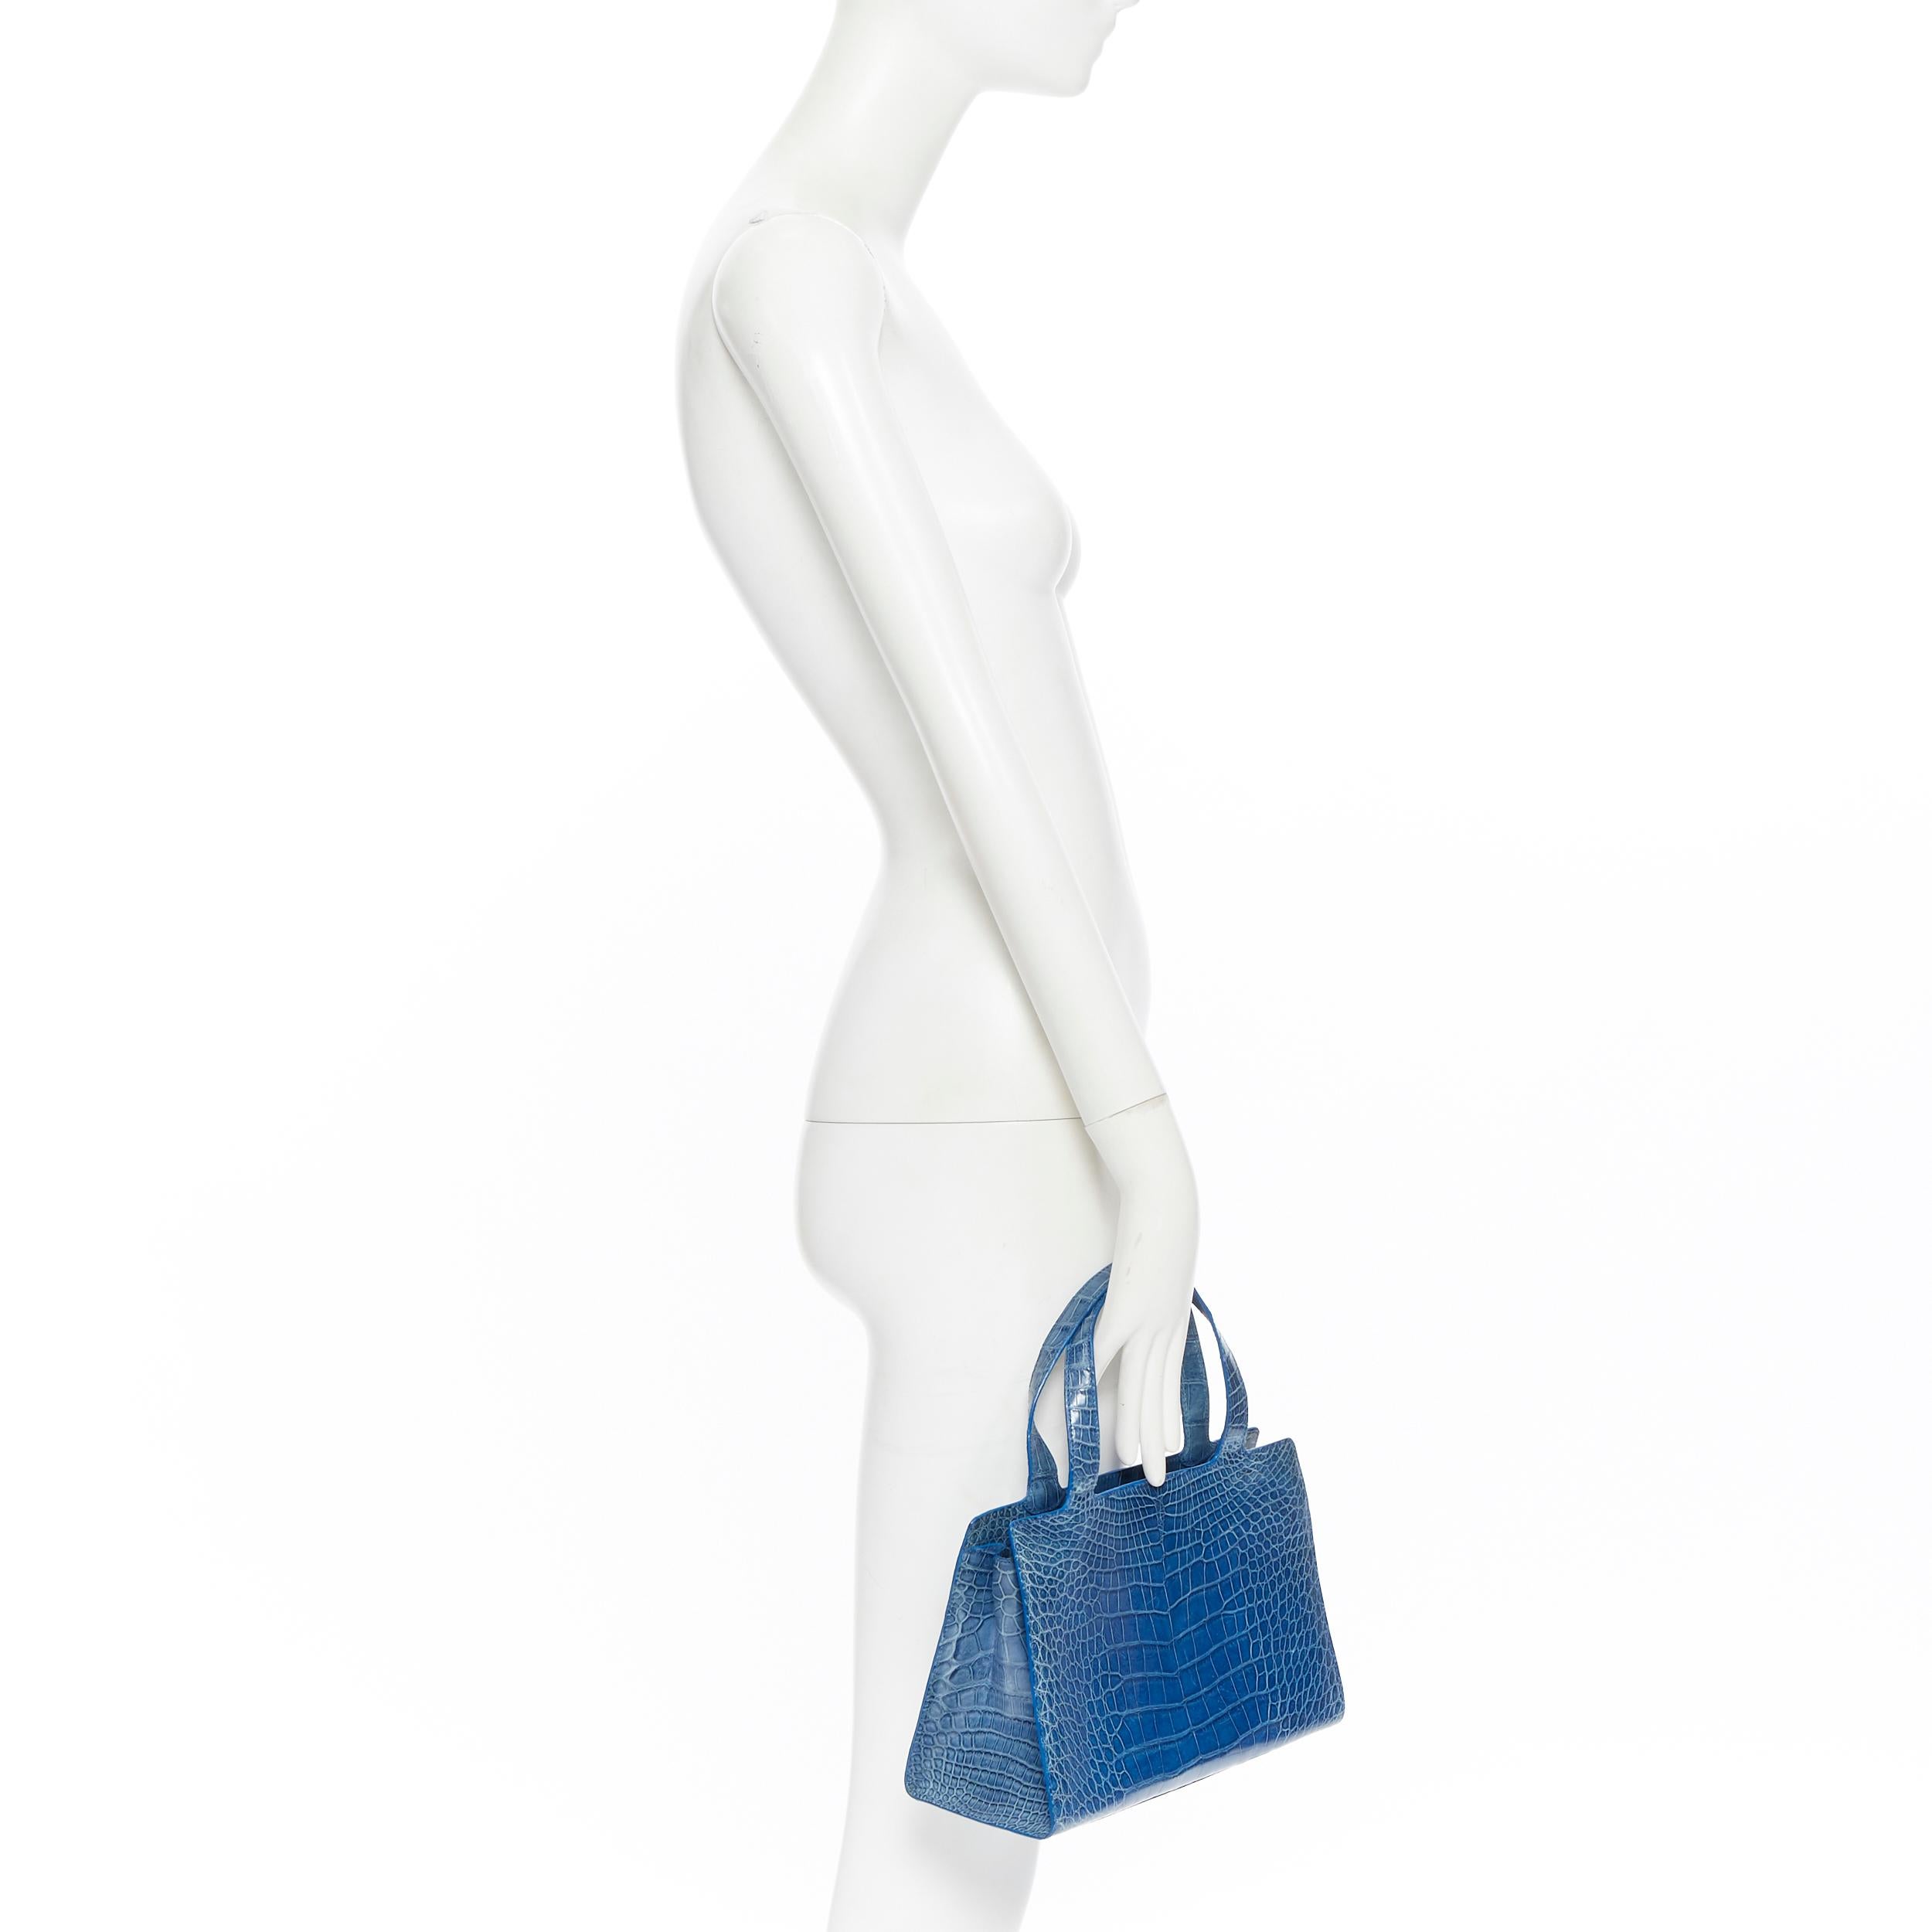 RALPH LAUREN blue crocodile leather top handle structured evening bag
Brand: Ralph Lauren
Model Name / Style: Crocodile bag
Material: Leather; crocodile leather
Color: Blue
Pattern: Solid
Closure: Zip
Extra Detail:
Made in: Italy

CONDITION: